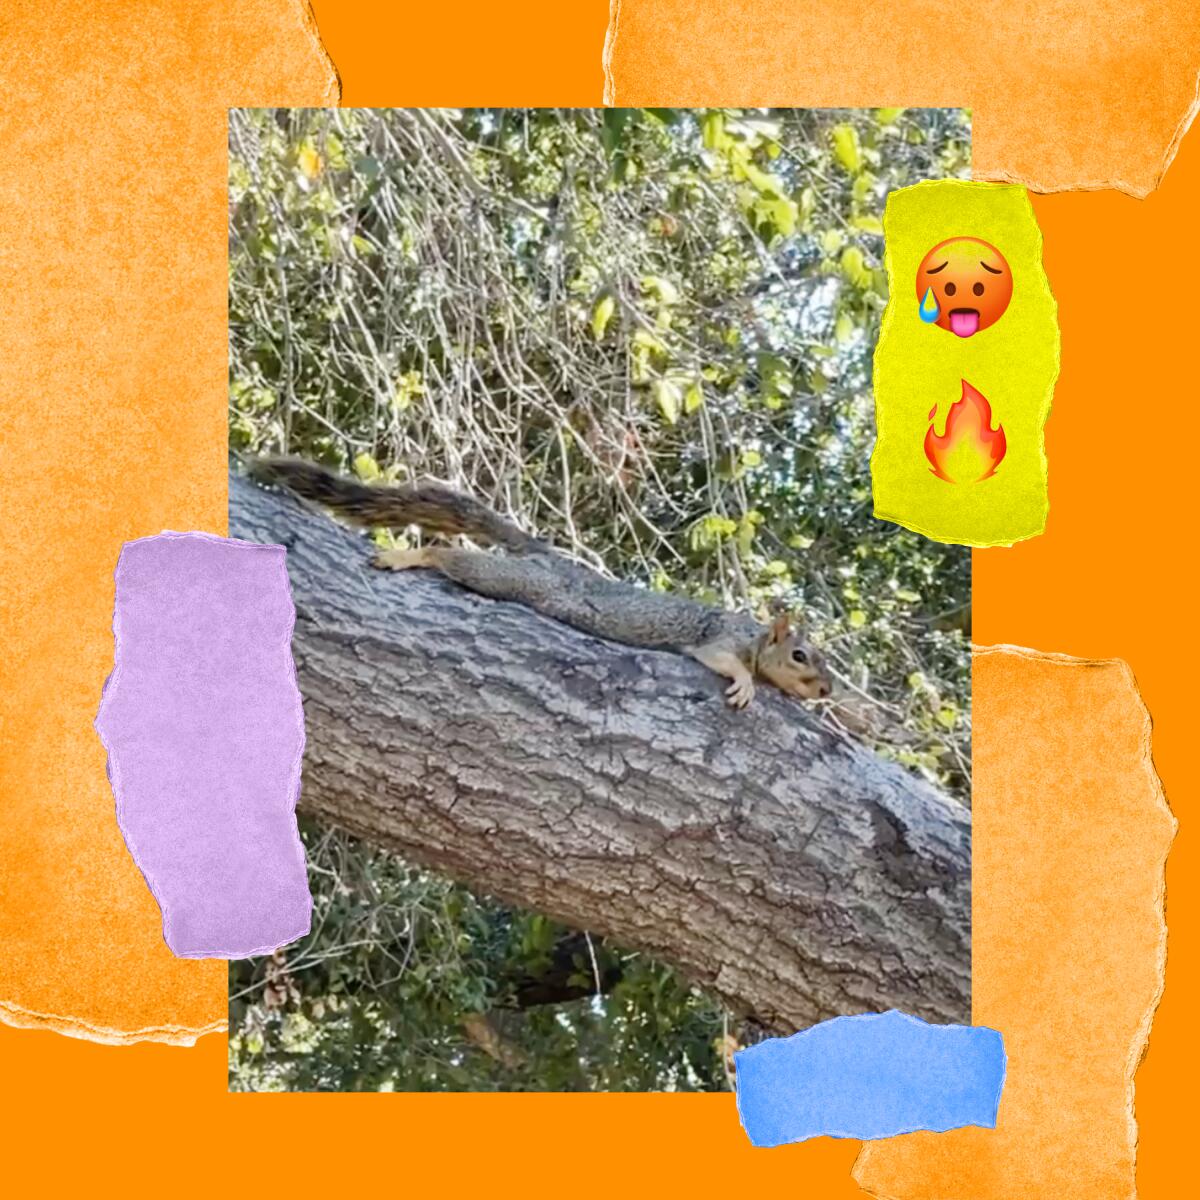 A squirrel lies flat on a branch. An emoji on the photo shows a flame.